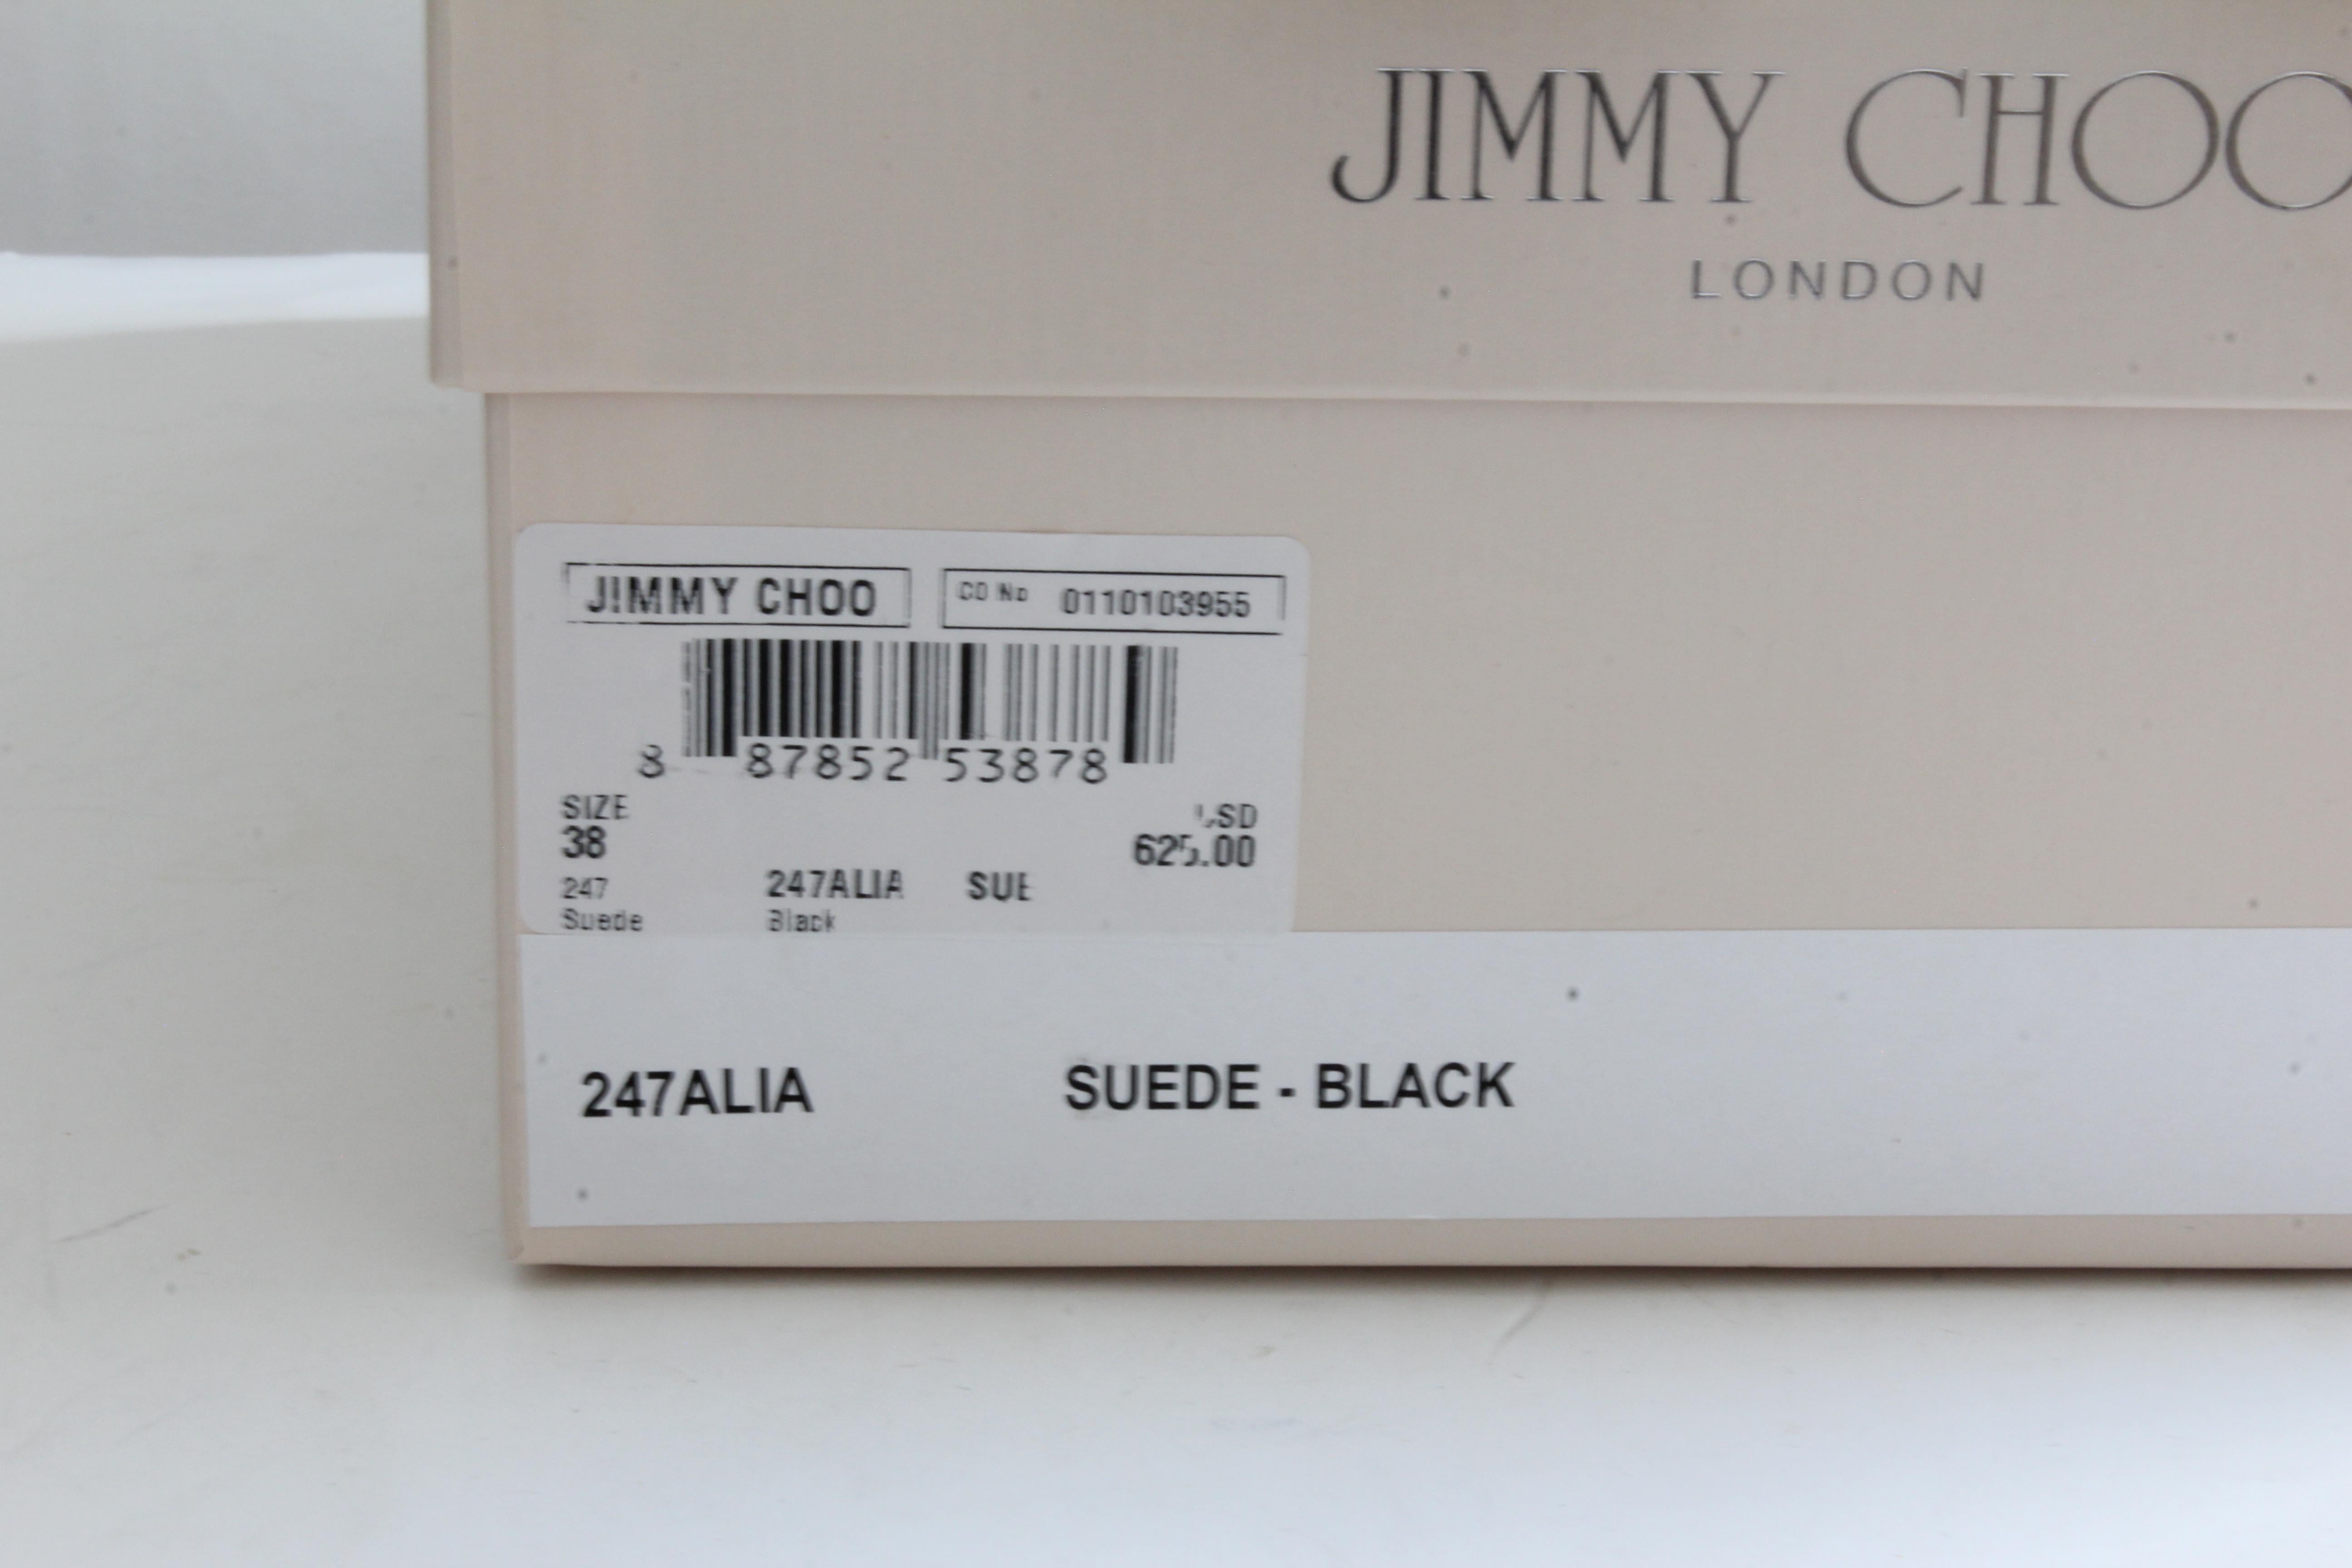 Jimmy Choo Heels Black Stiletto Pumps 247 Alia Suede Leather with Box For Sale 7